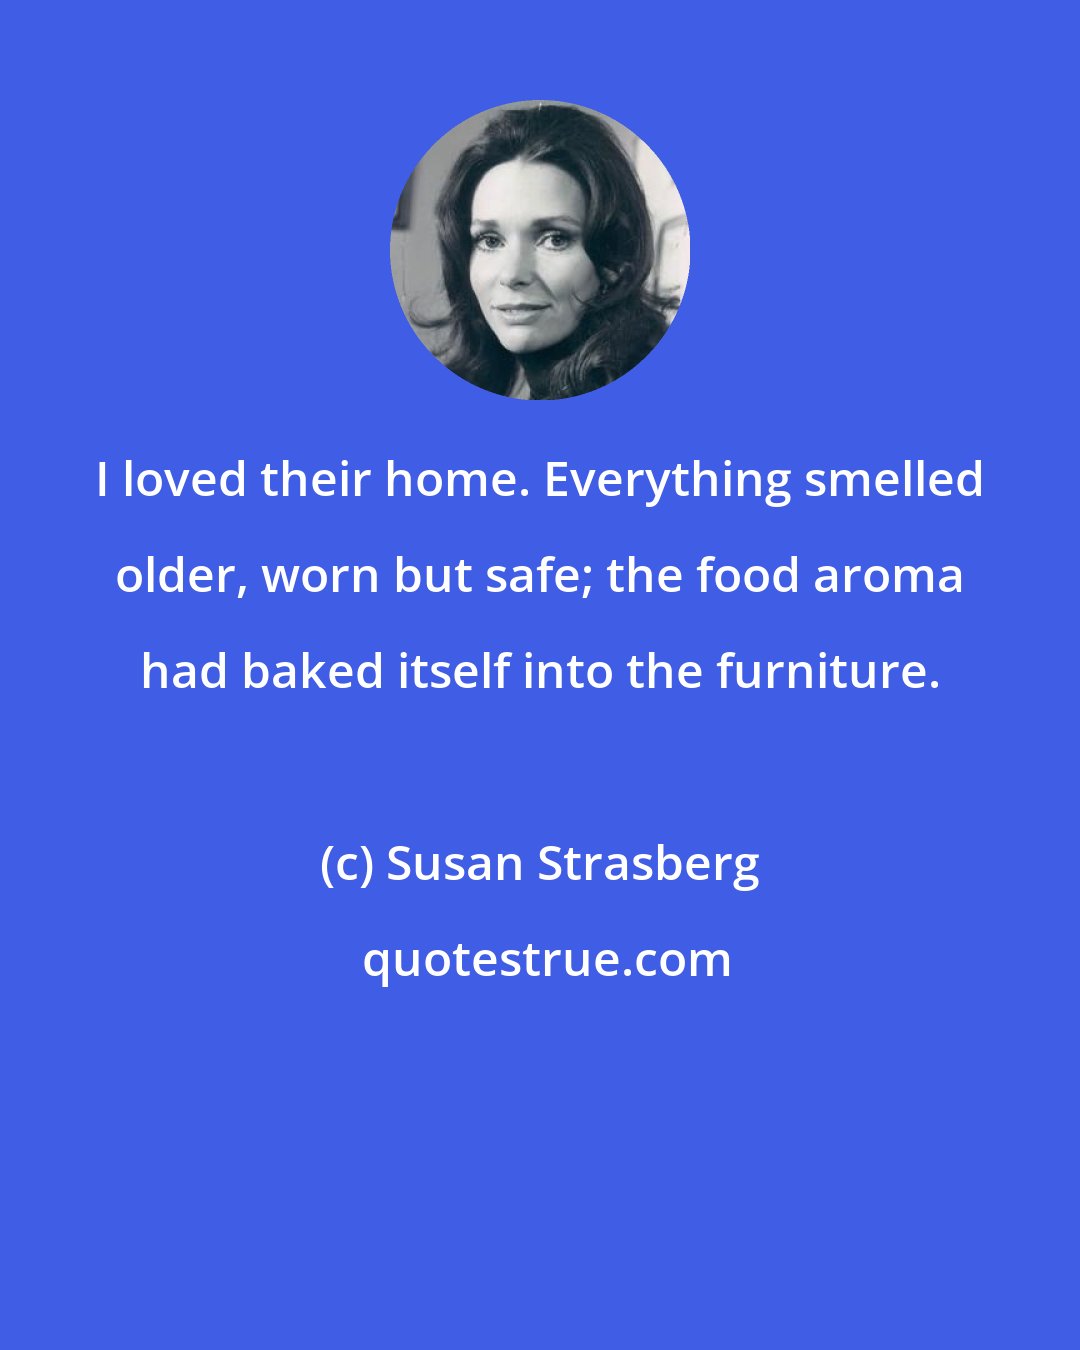 Susan Strasberg: I loved their home. Everything smelled older, worn but safe; the food aroma had baked itself into the furniture.